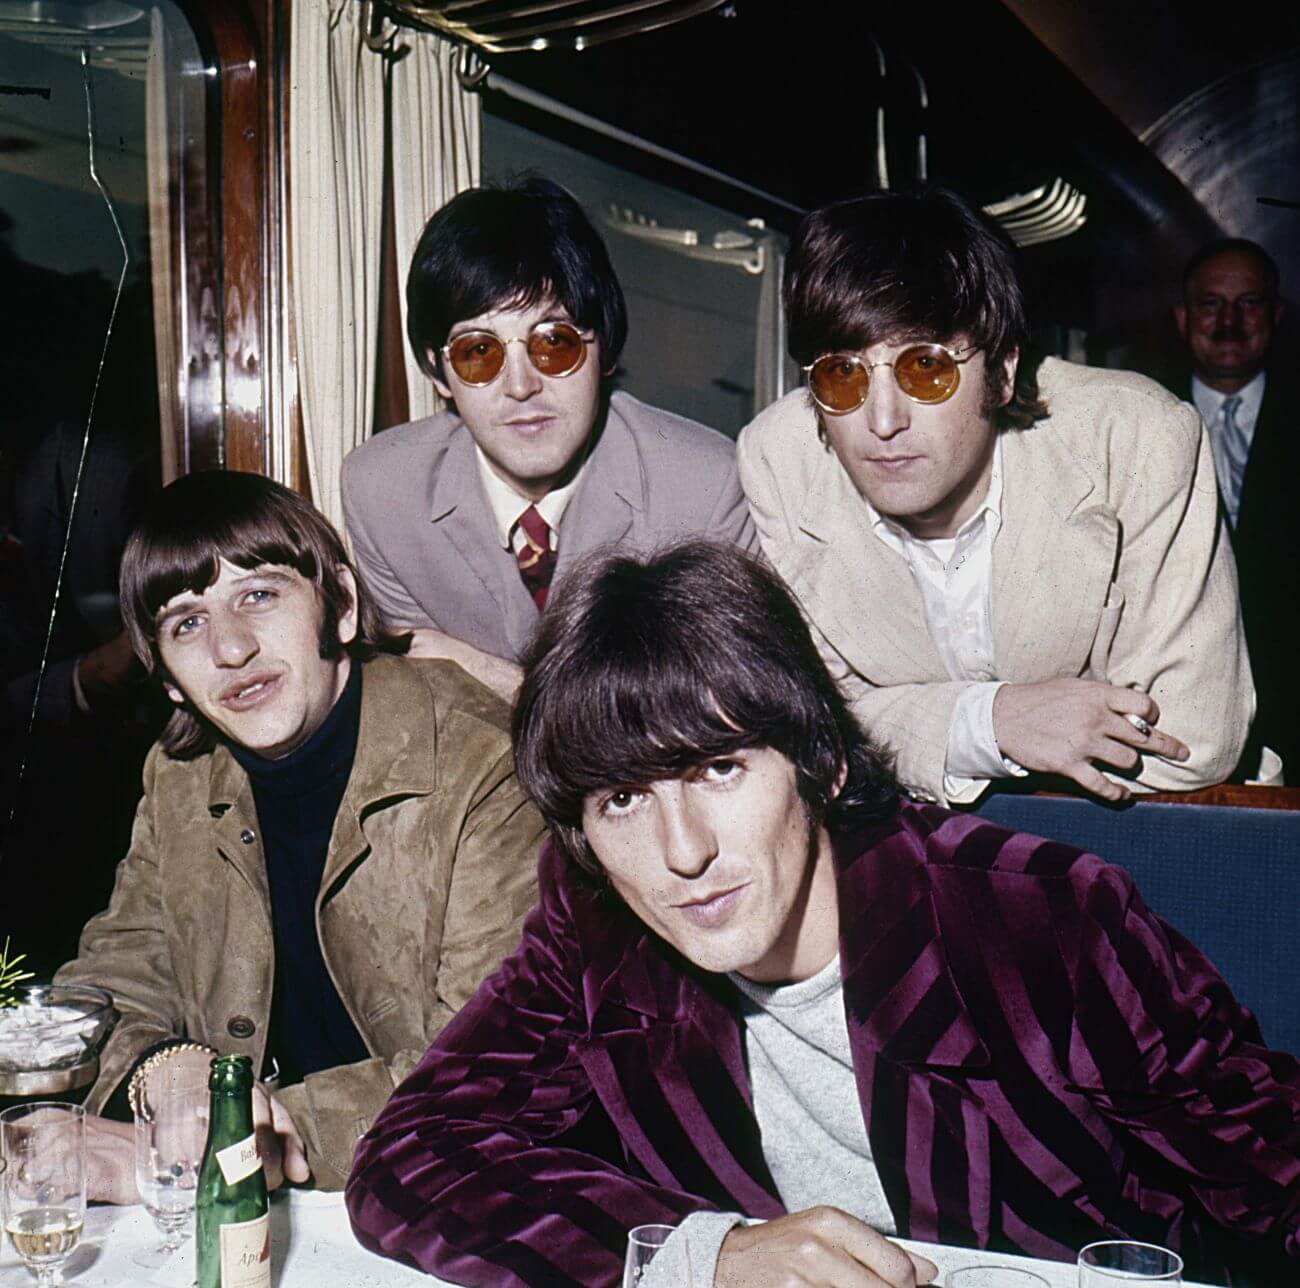 Ringo Starr and George Harrison sit at a table while Paul McCartney and John Lennon lean over the back of their seats.